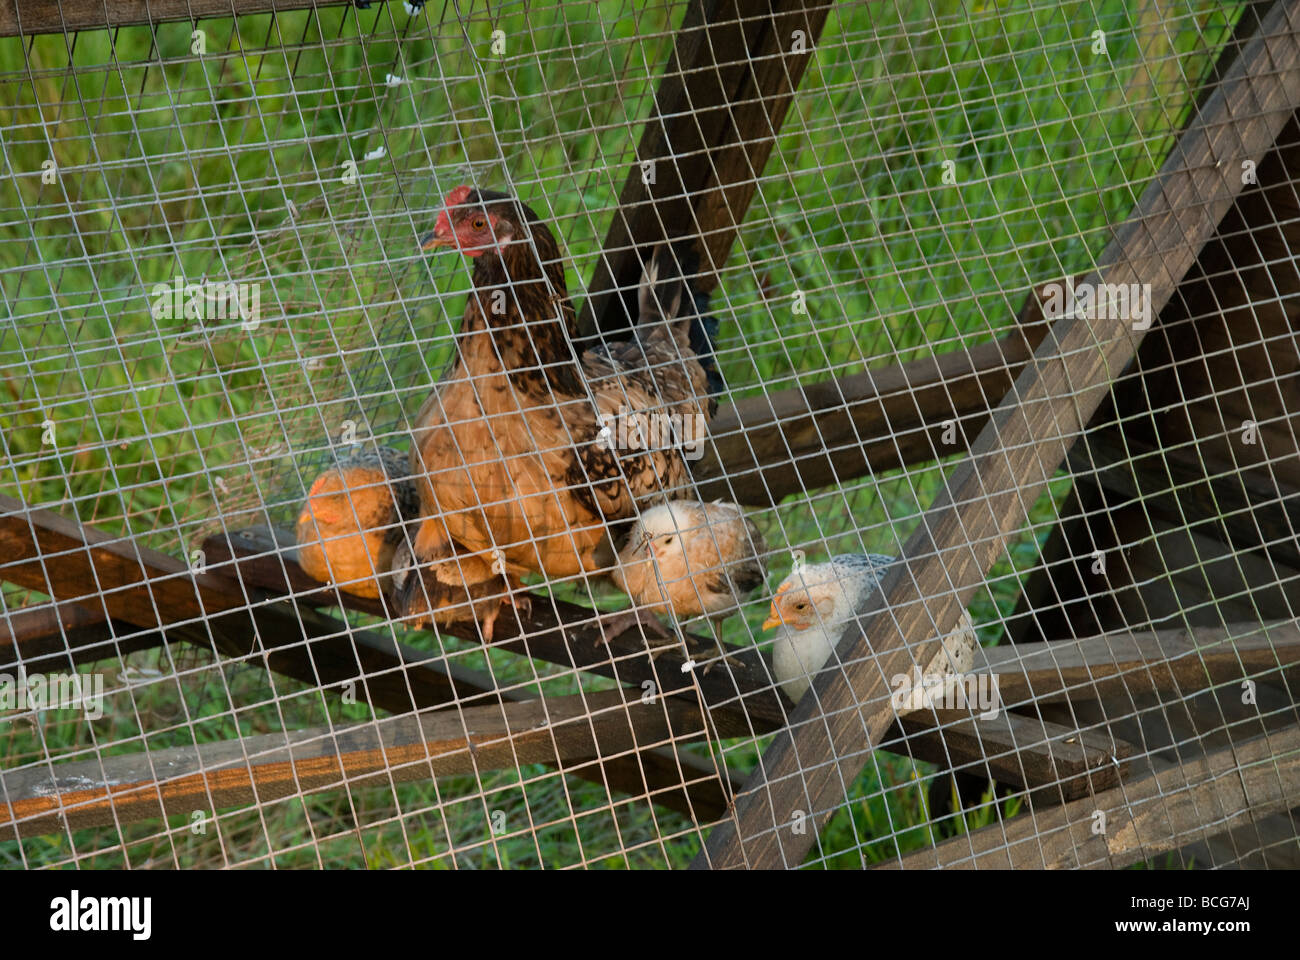 Mother hen with chicks in ark Stock Photo